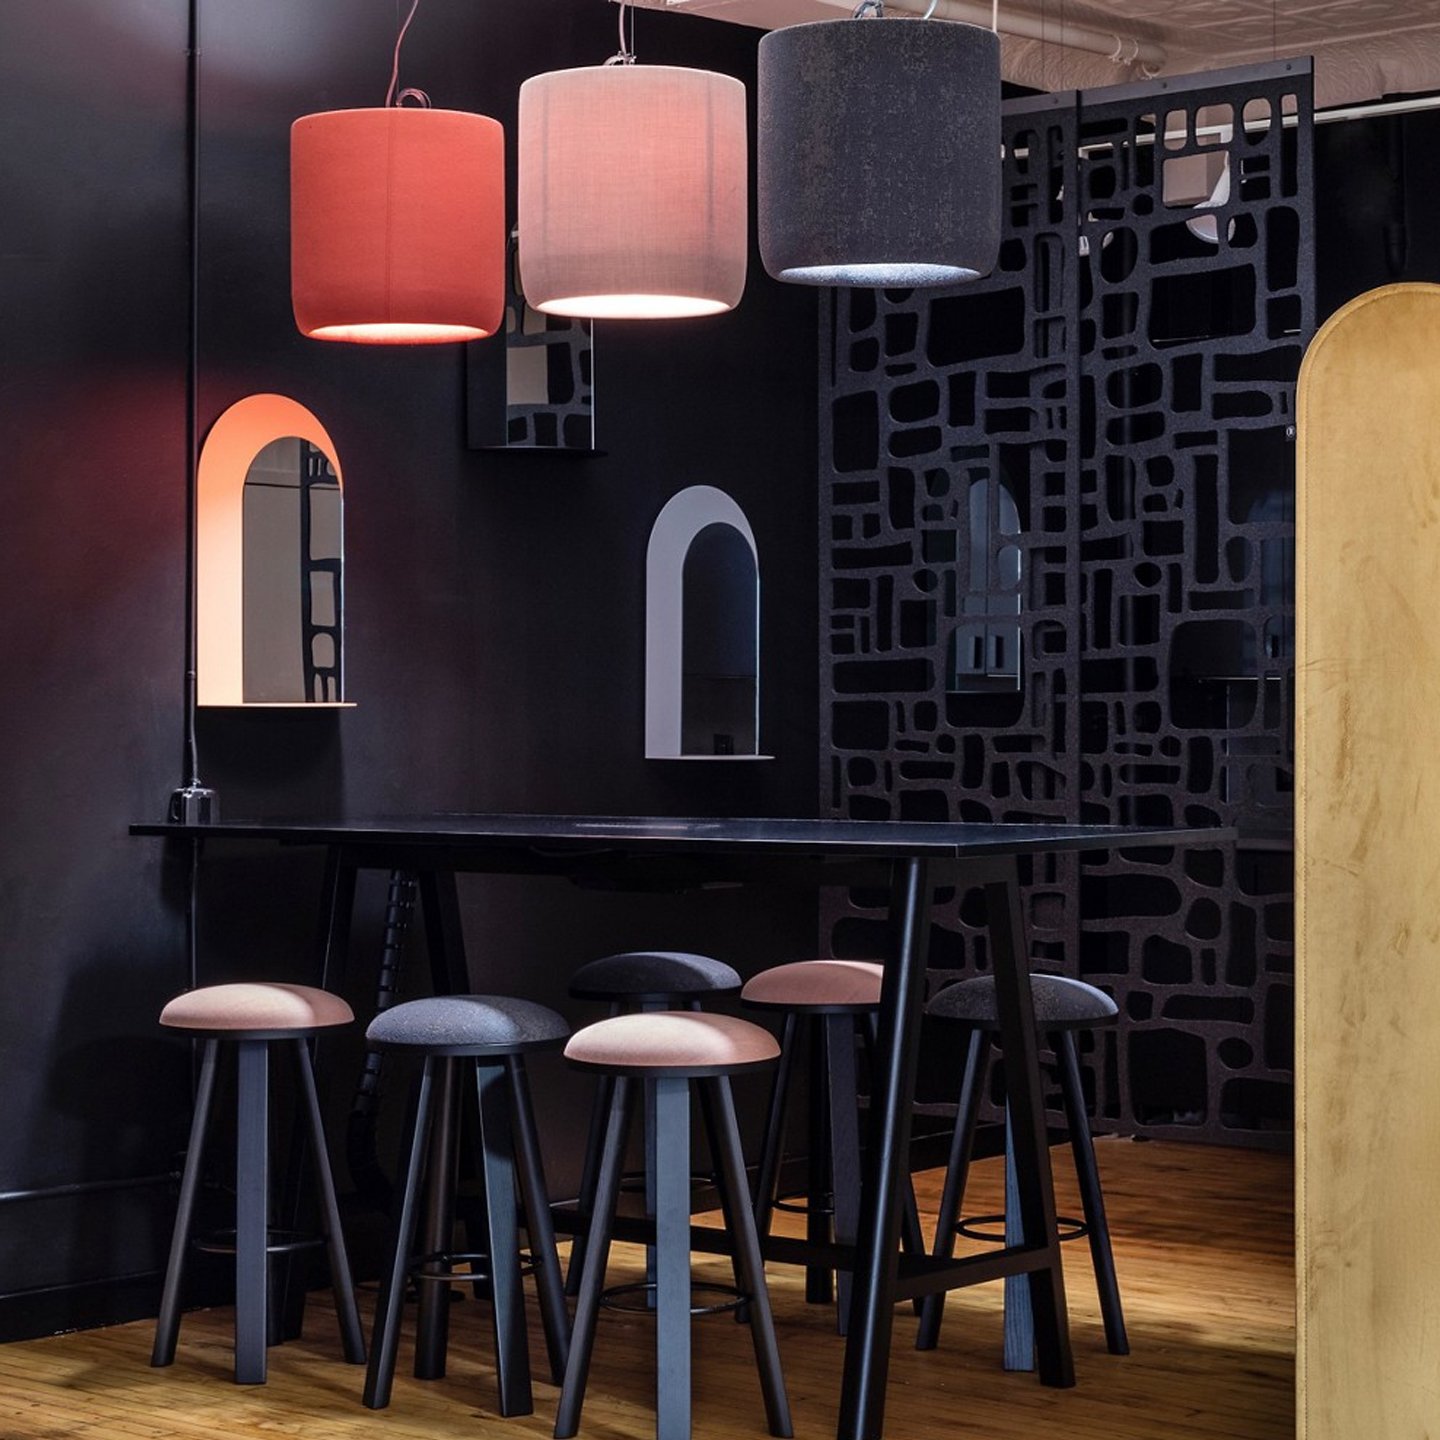 Haworth BuzziProp Lighting in red, pink and black in a dark office spae with a black table and tall chairs